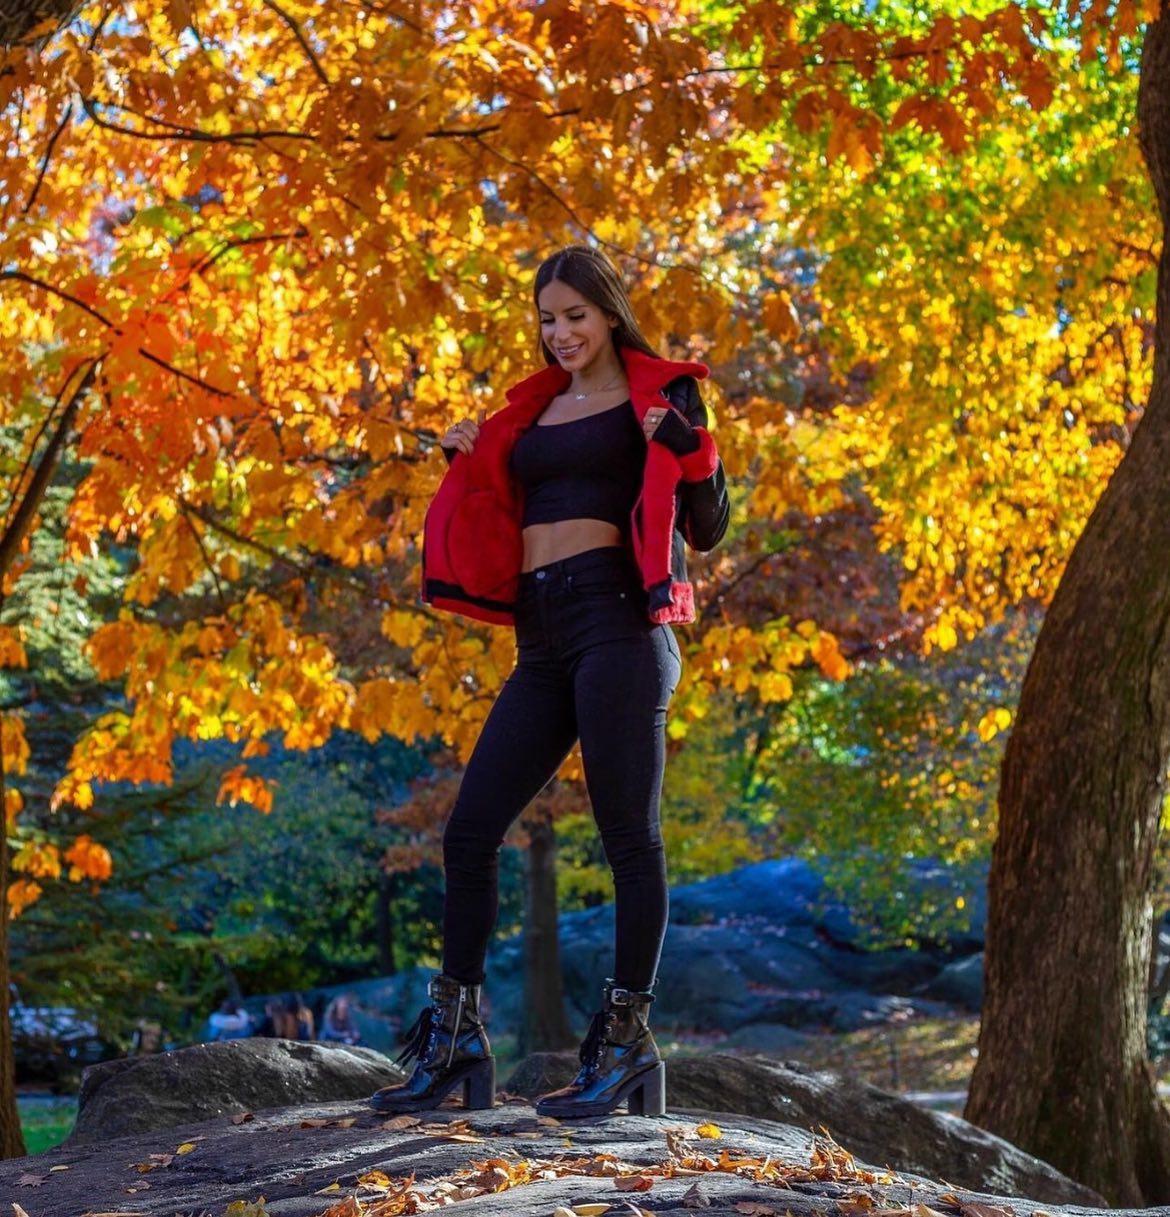 Jen Selter shows off her abs on Thanksgiving